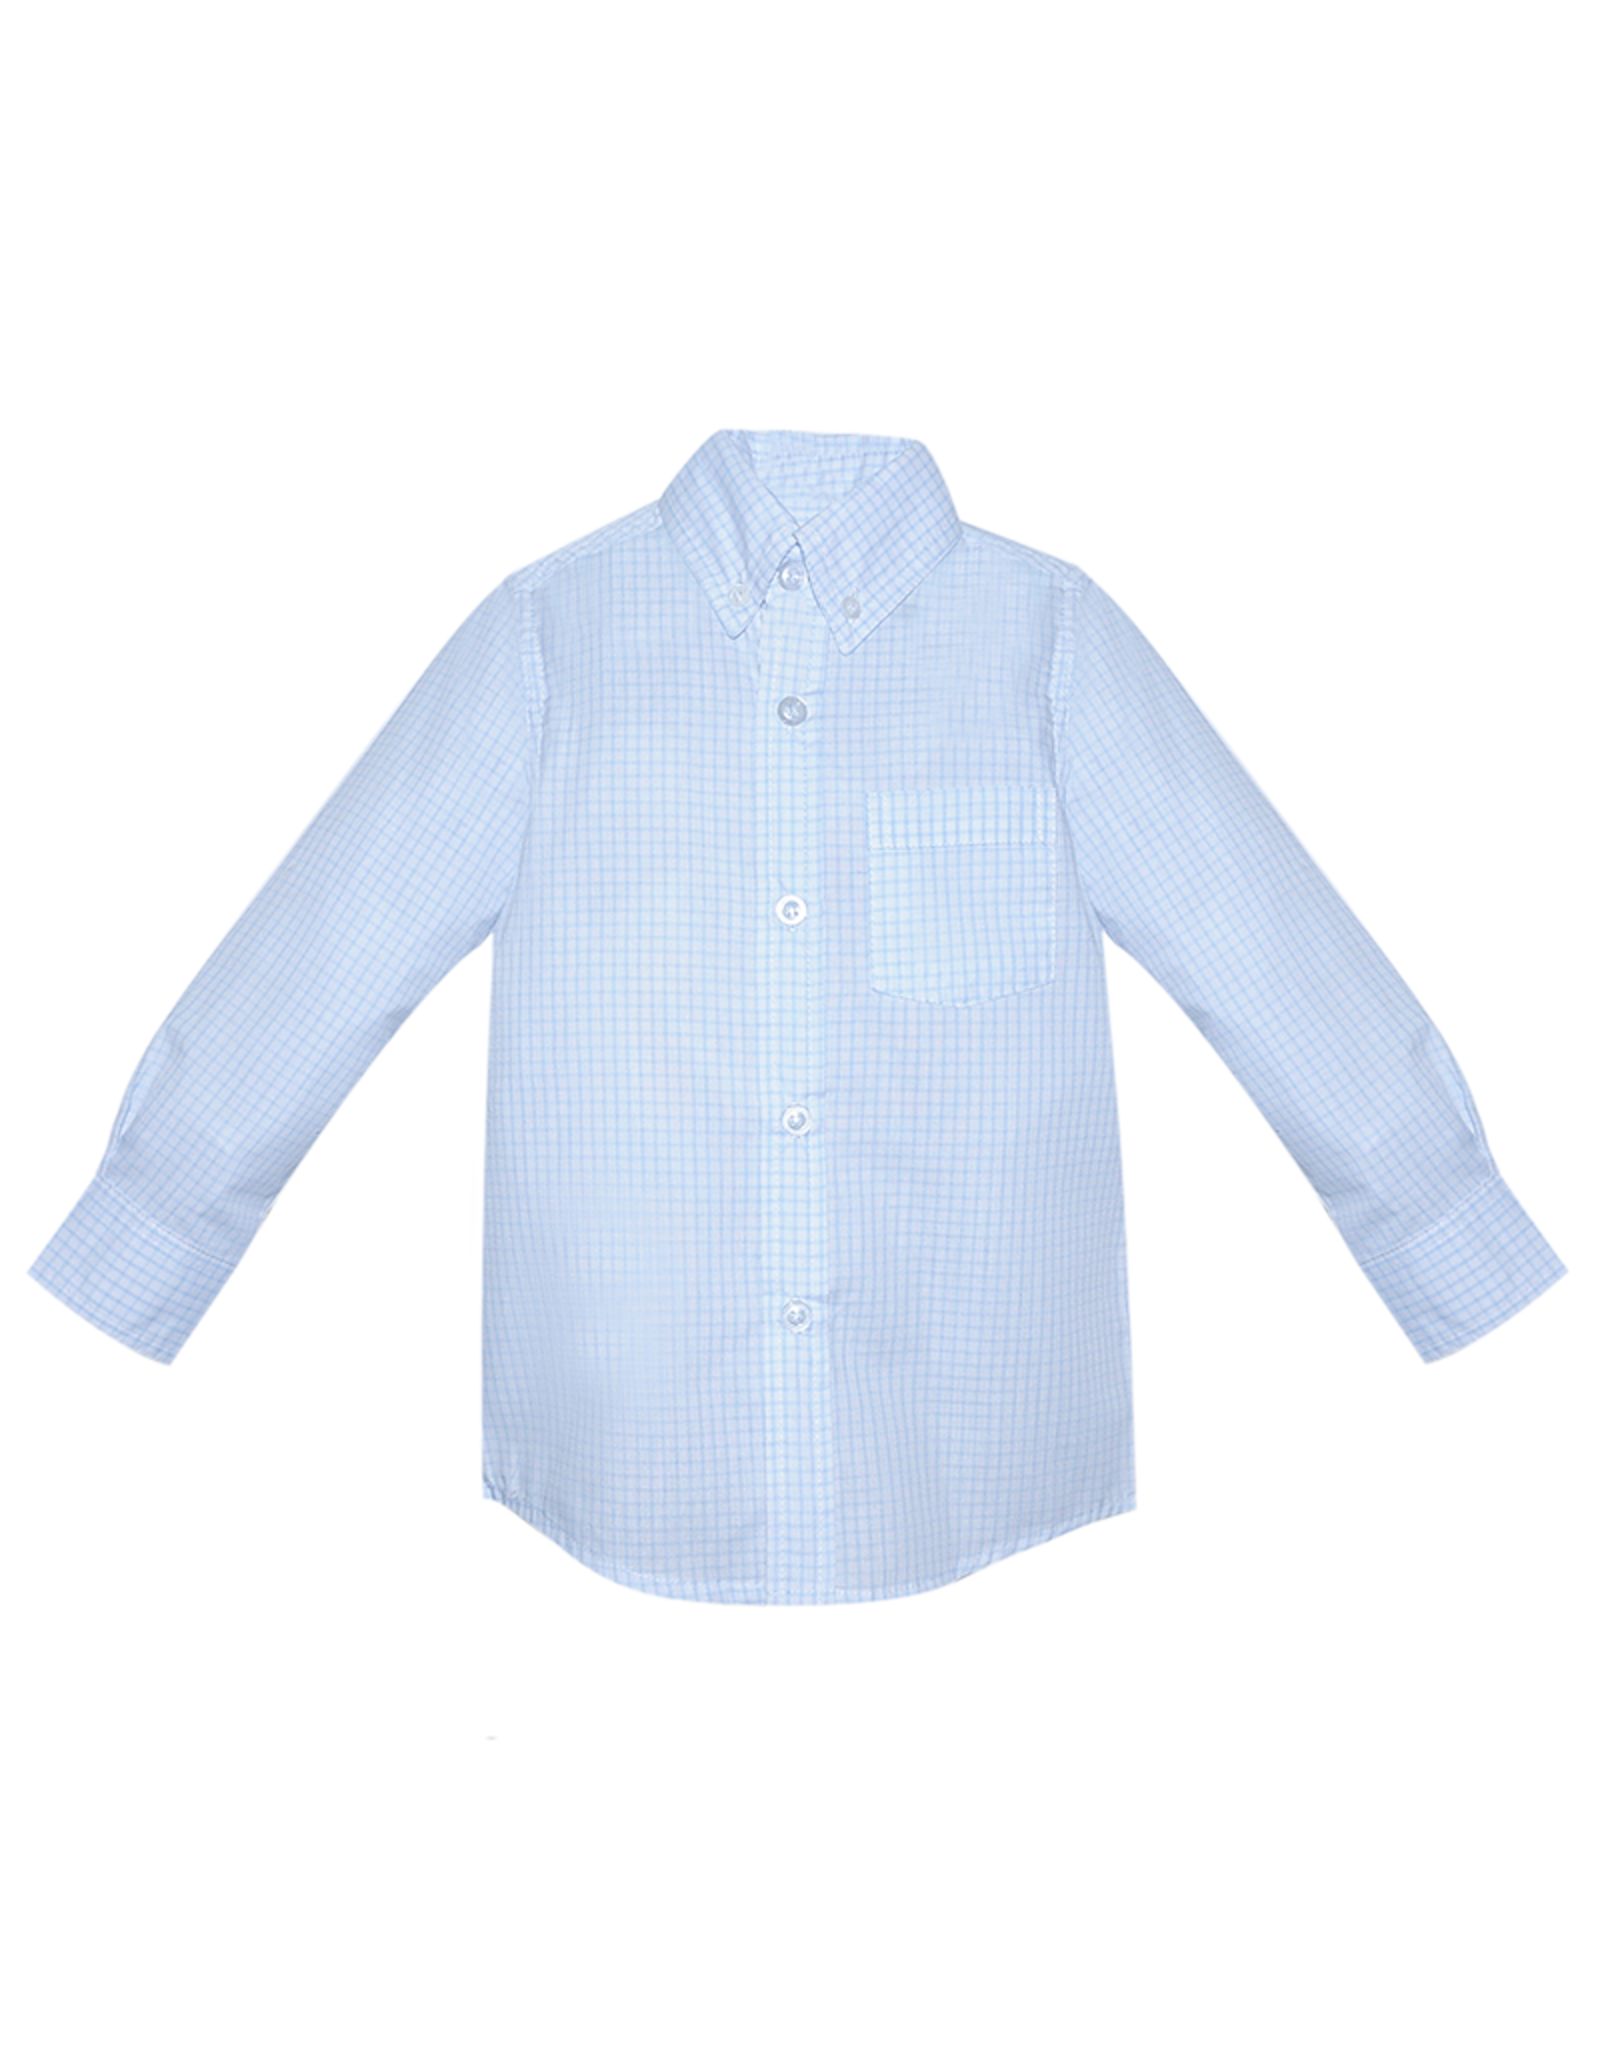 Remember Nguyen ABSHT Button Down Shirt Blue Square Check